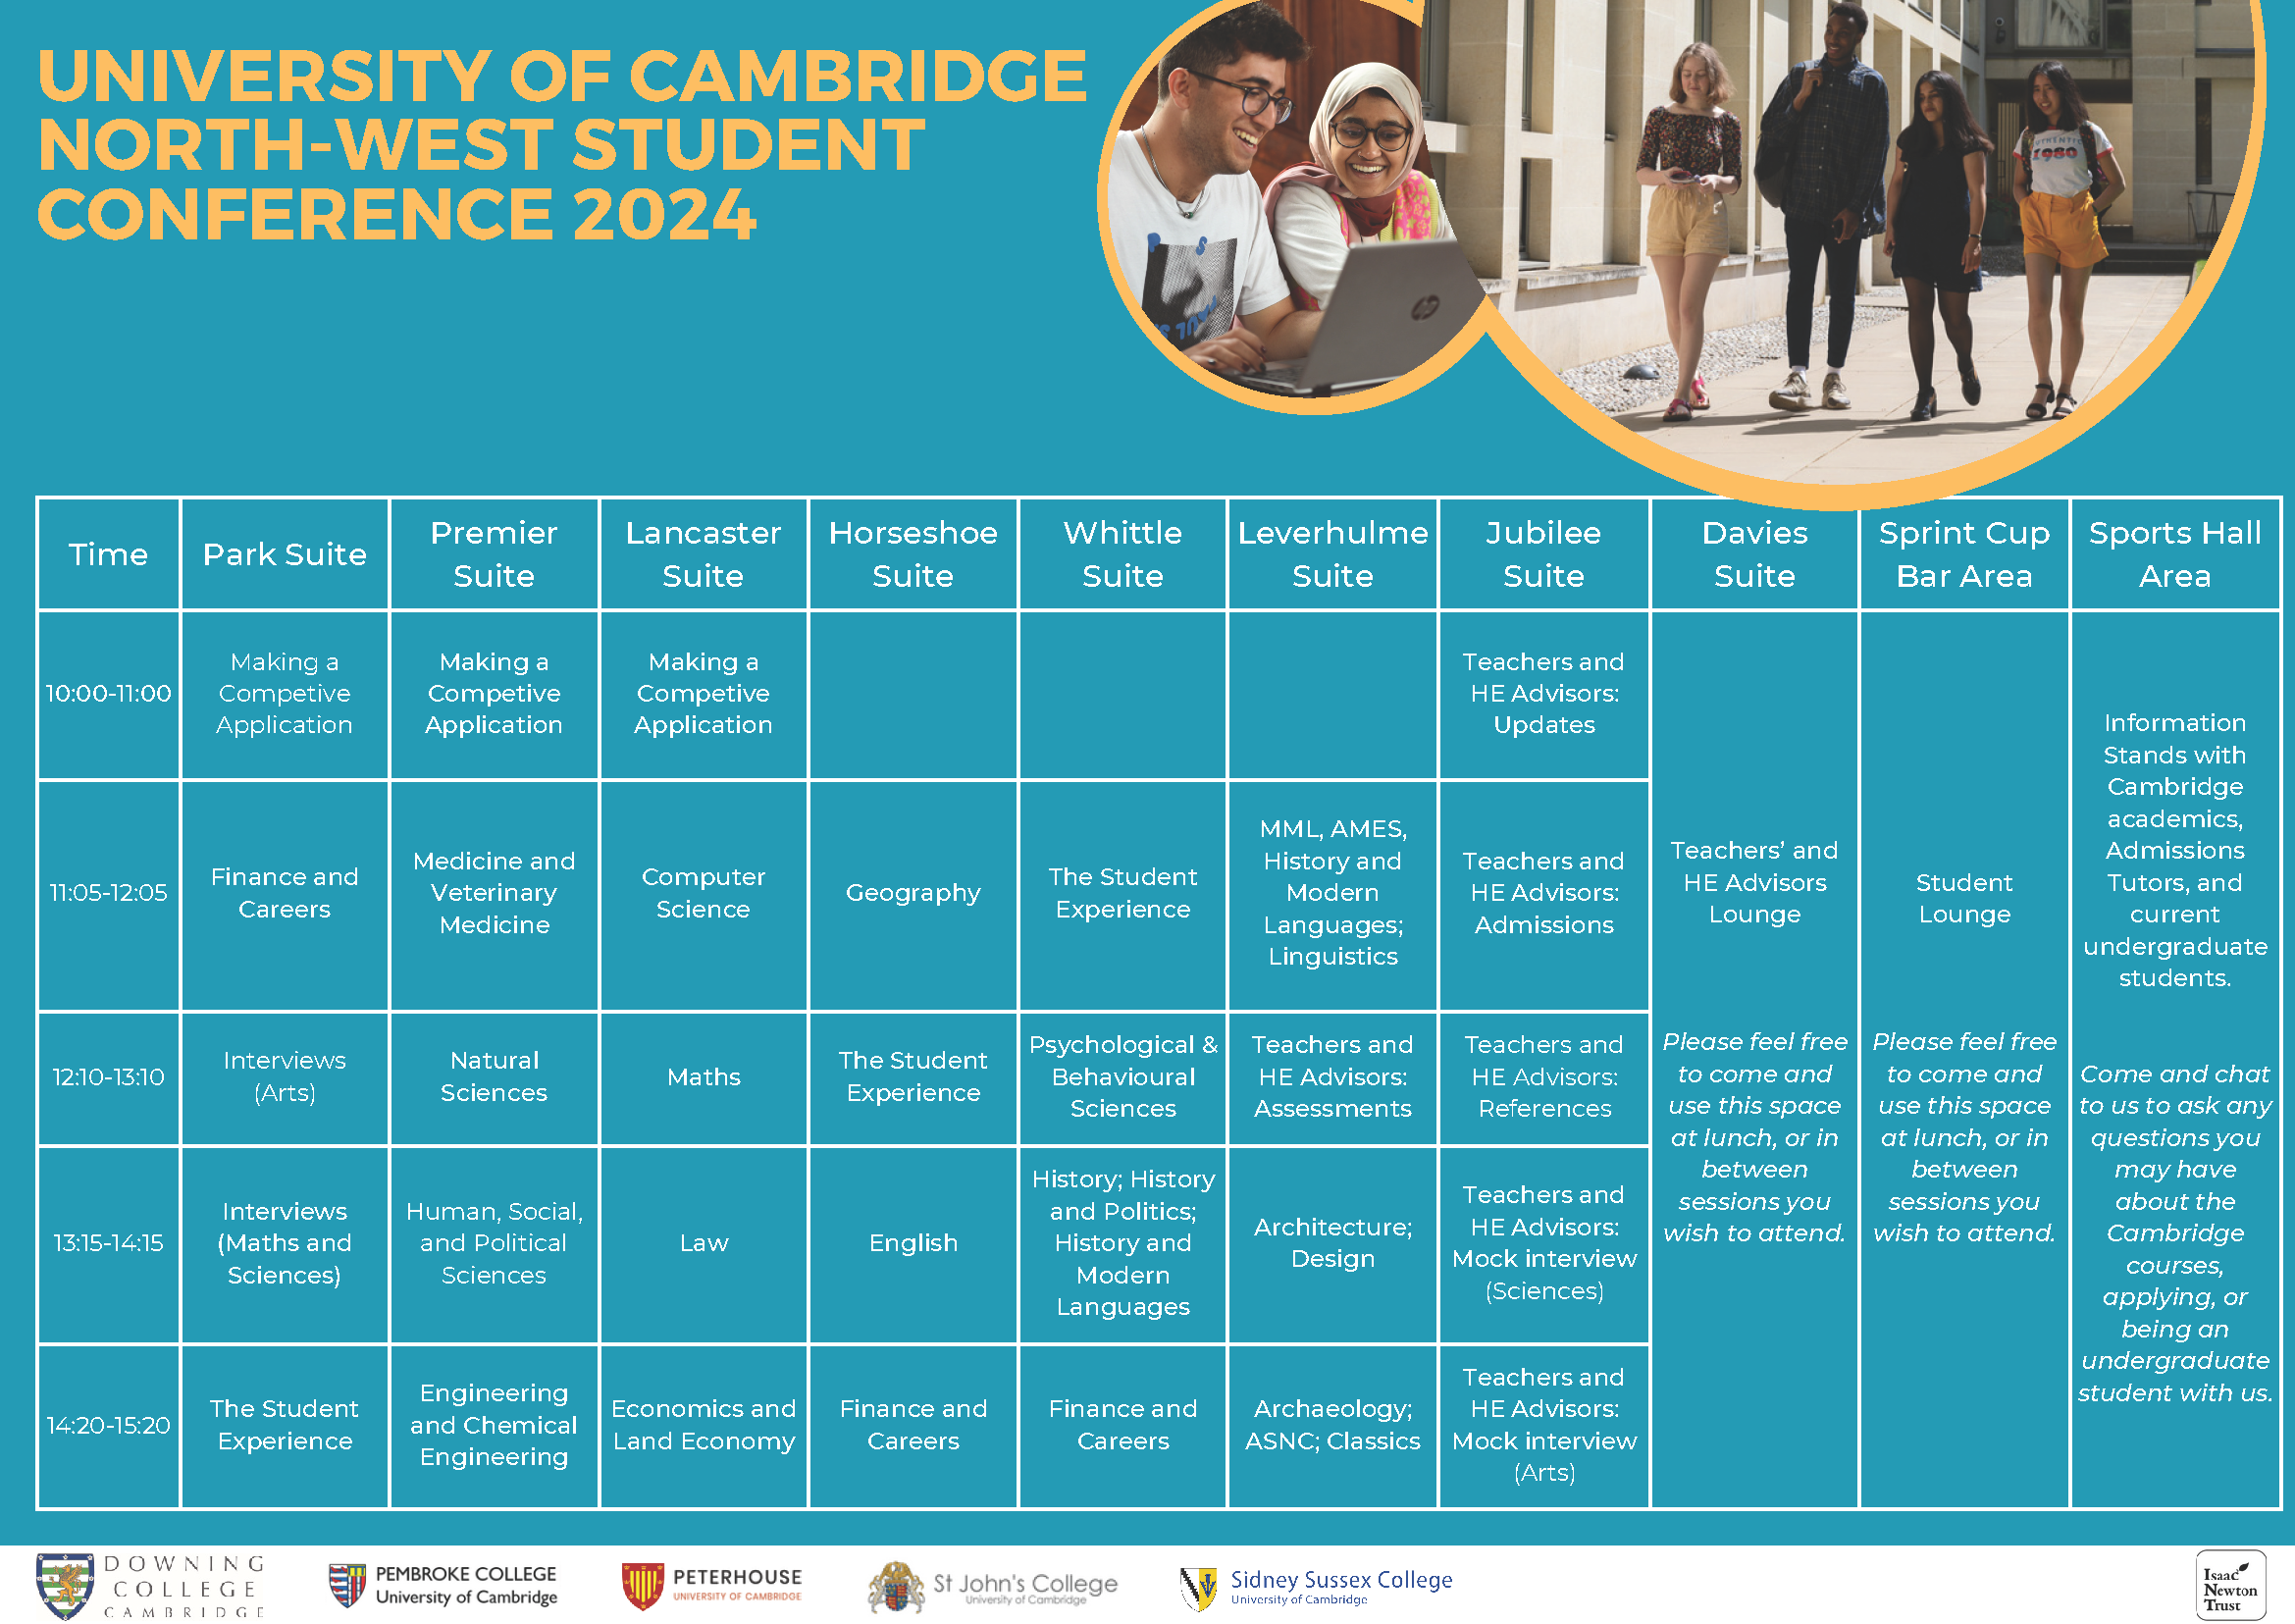 Timetable of events at conference.